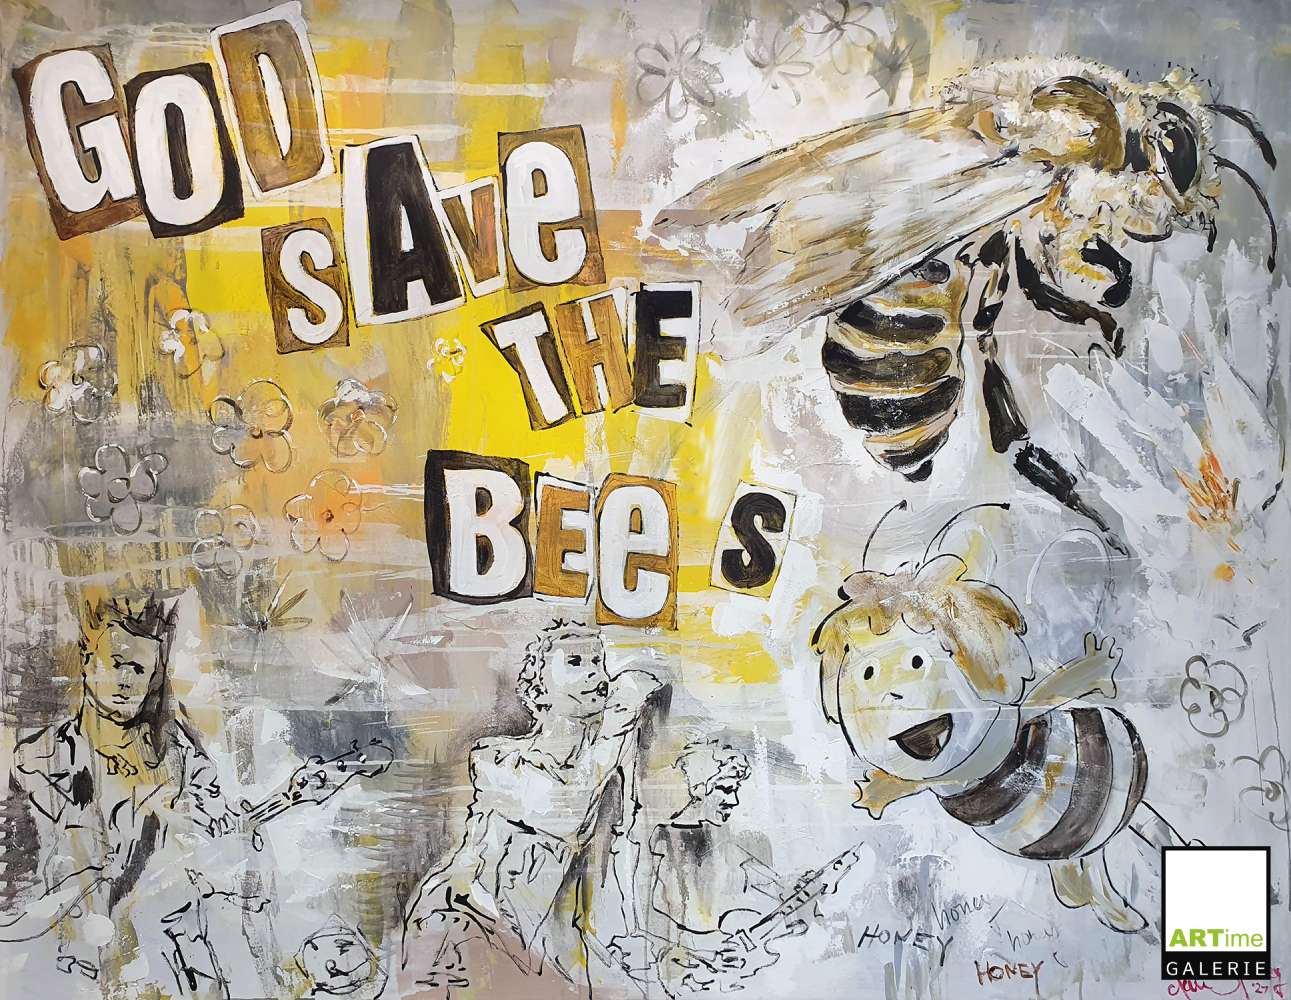 God save the Bees